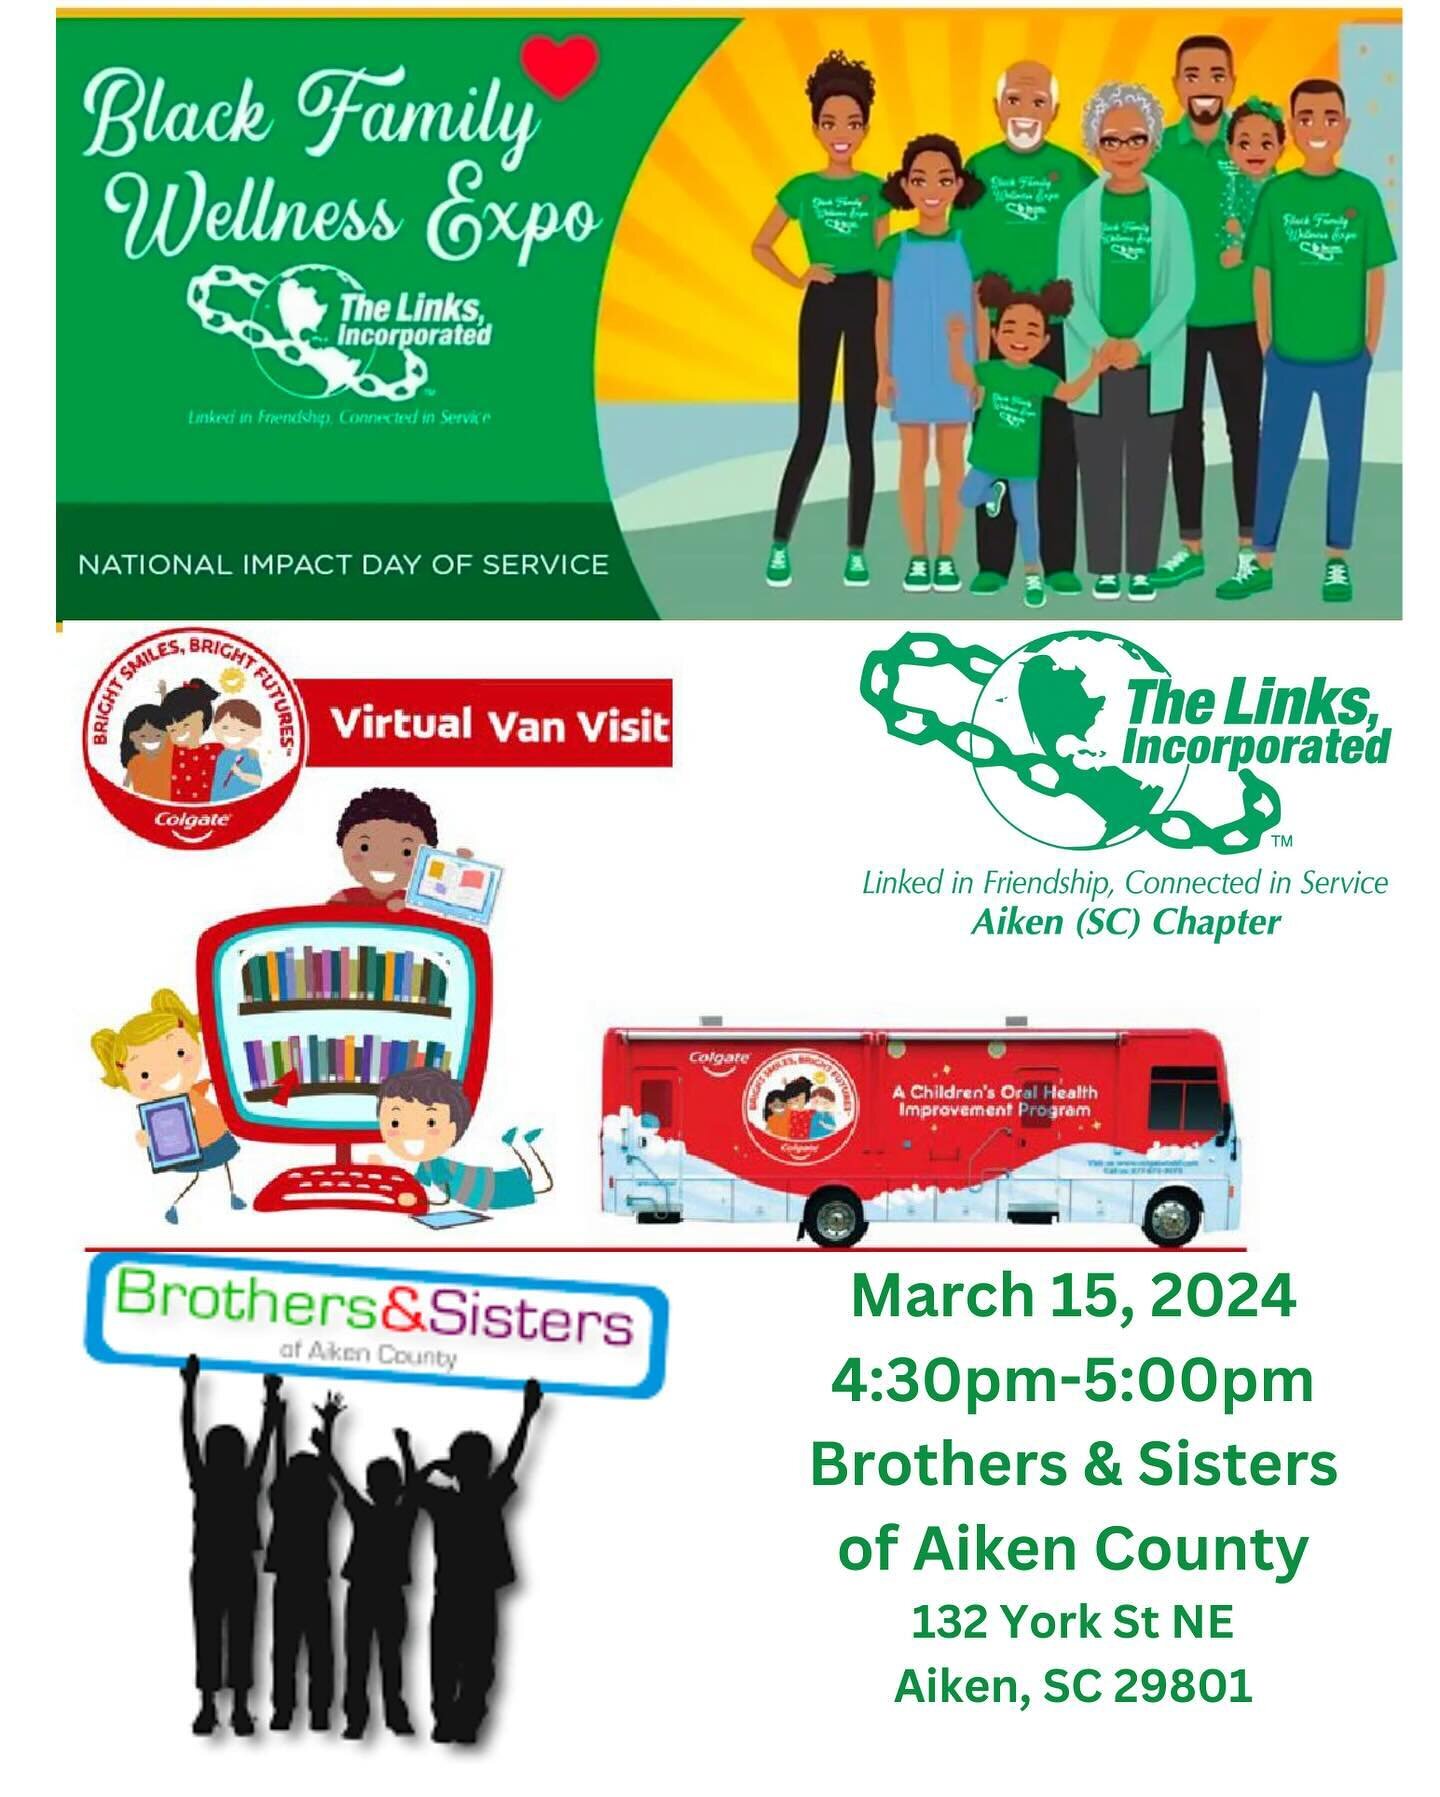 The Aiken (SC) Chapter partnered with Colgate Bright Smiles, Bright Futures and provided virtual oral and overall health and wellness education for the children of Brothers &amp; Sisters of Aiken County via a Virtual Van Visit for our Black Family We